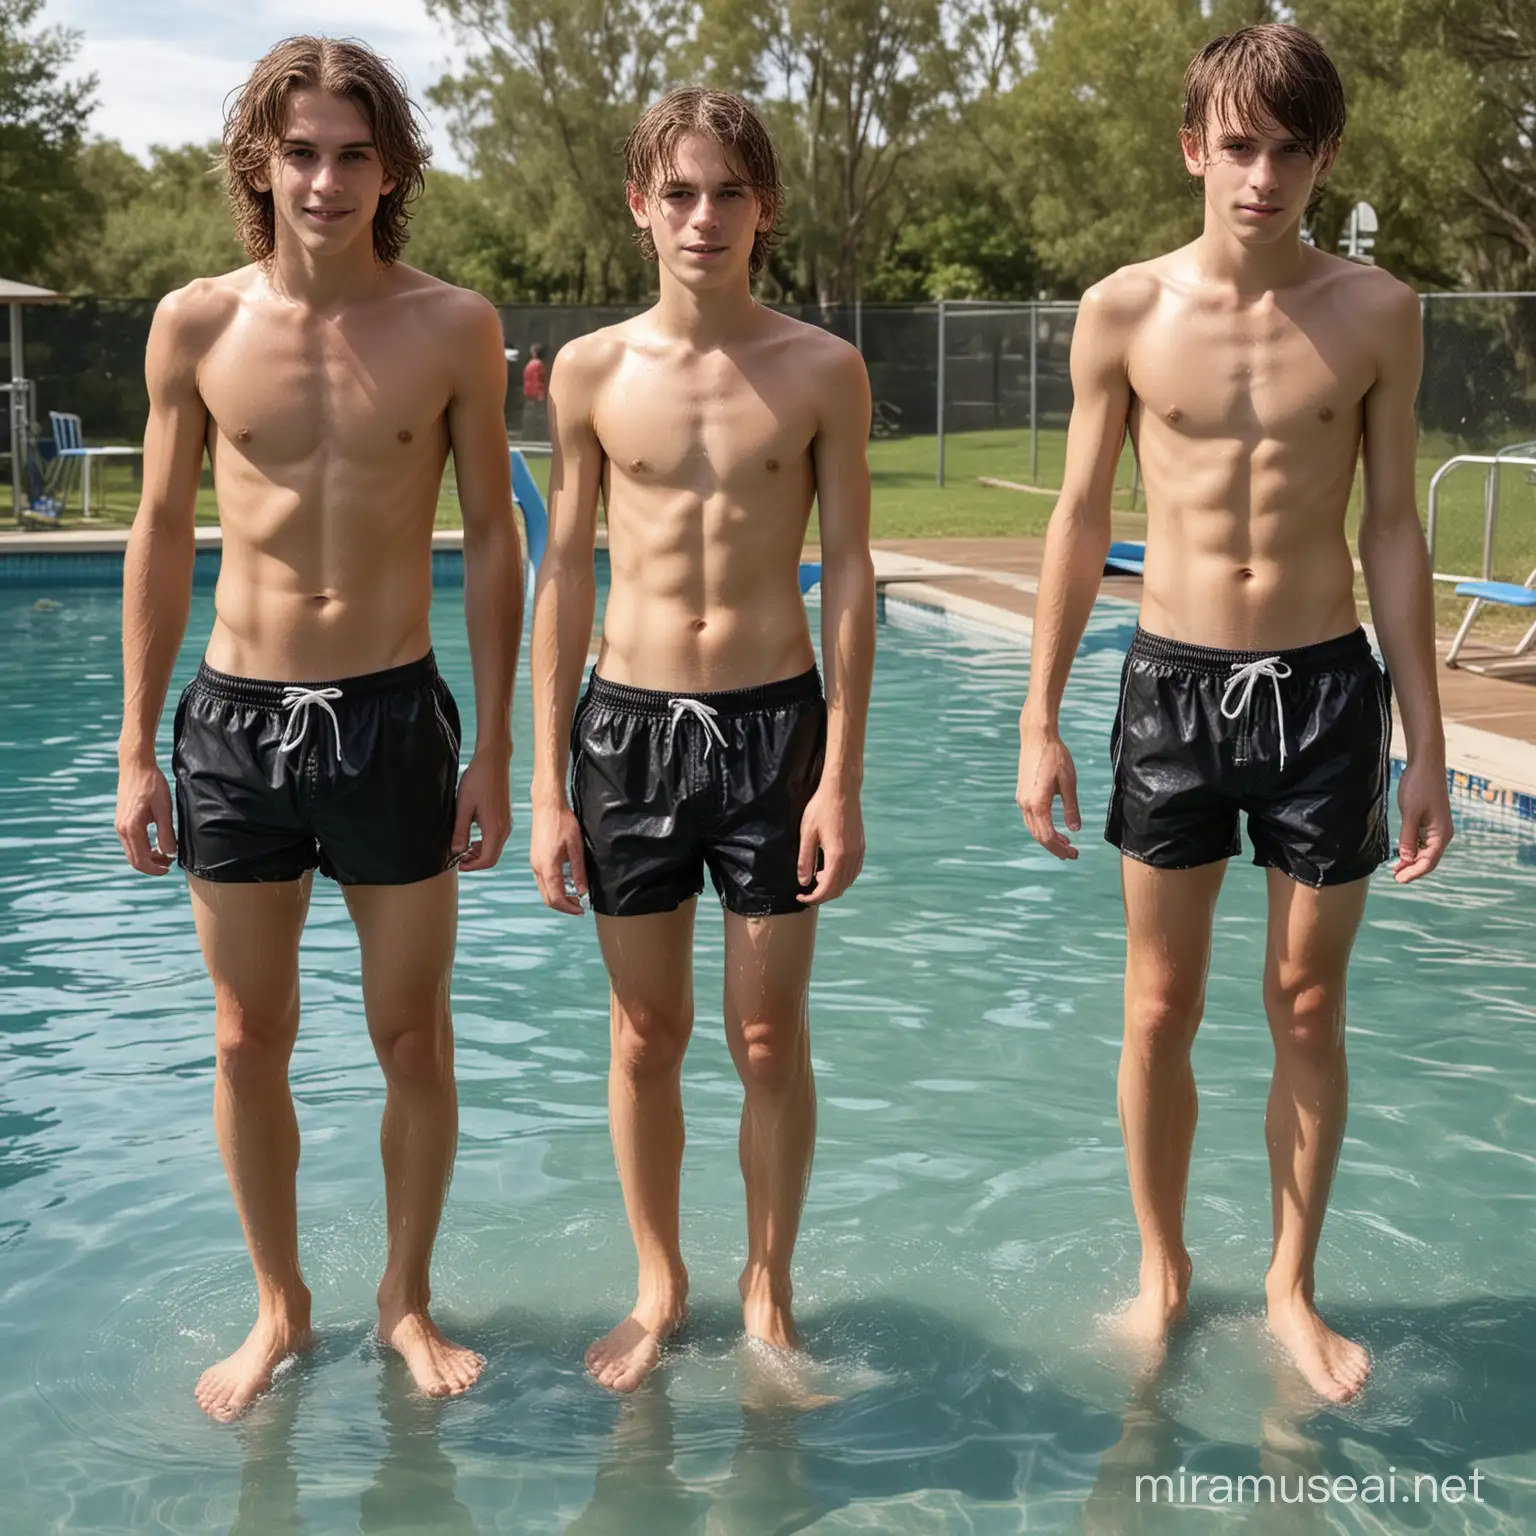 Teen Boys Playfully Swimming in School Pool in Wet Clothes